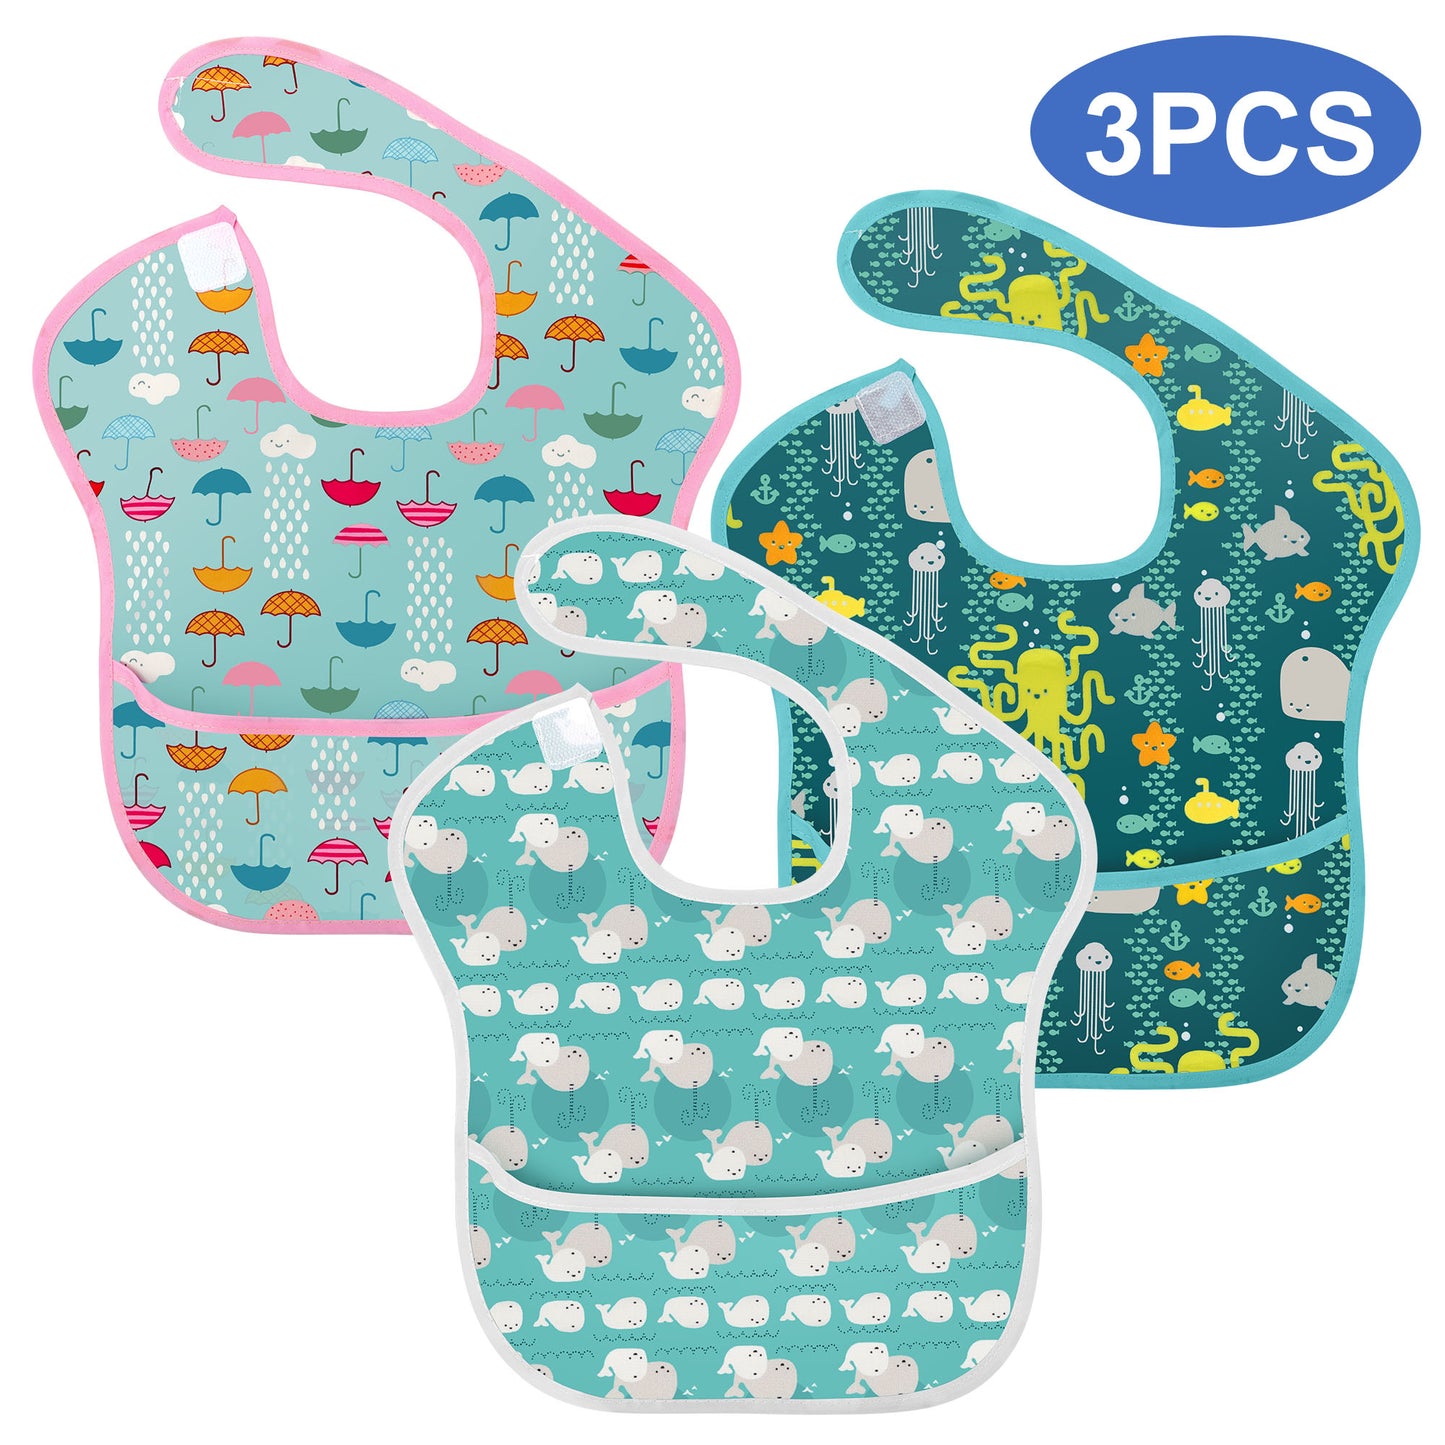 3 PCS Adjustable Waterproof Baby Bibs for Toddlers 6-24 Months，Stain-Resistant Fabric, Crumb Catcher Pocket,Cartoon Animals Patterns (Whale, Umbrella, Octopus )